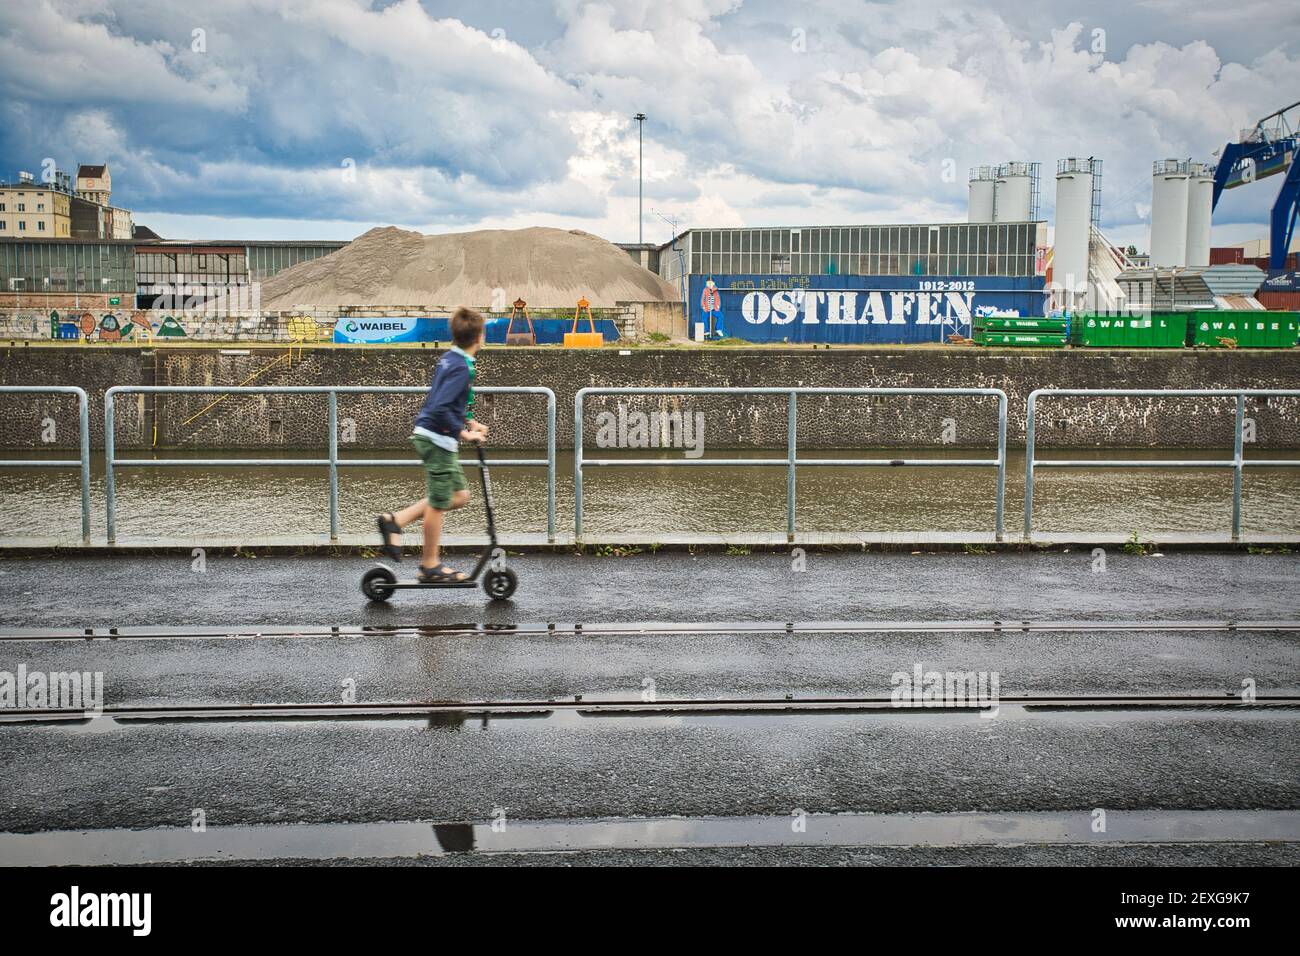 Boy riding his scooter passing East harbor, Frankfurt, Germany Stock Photo